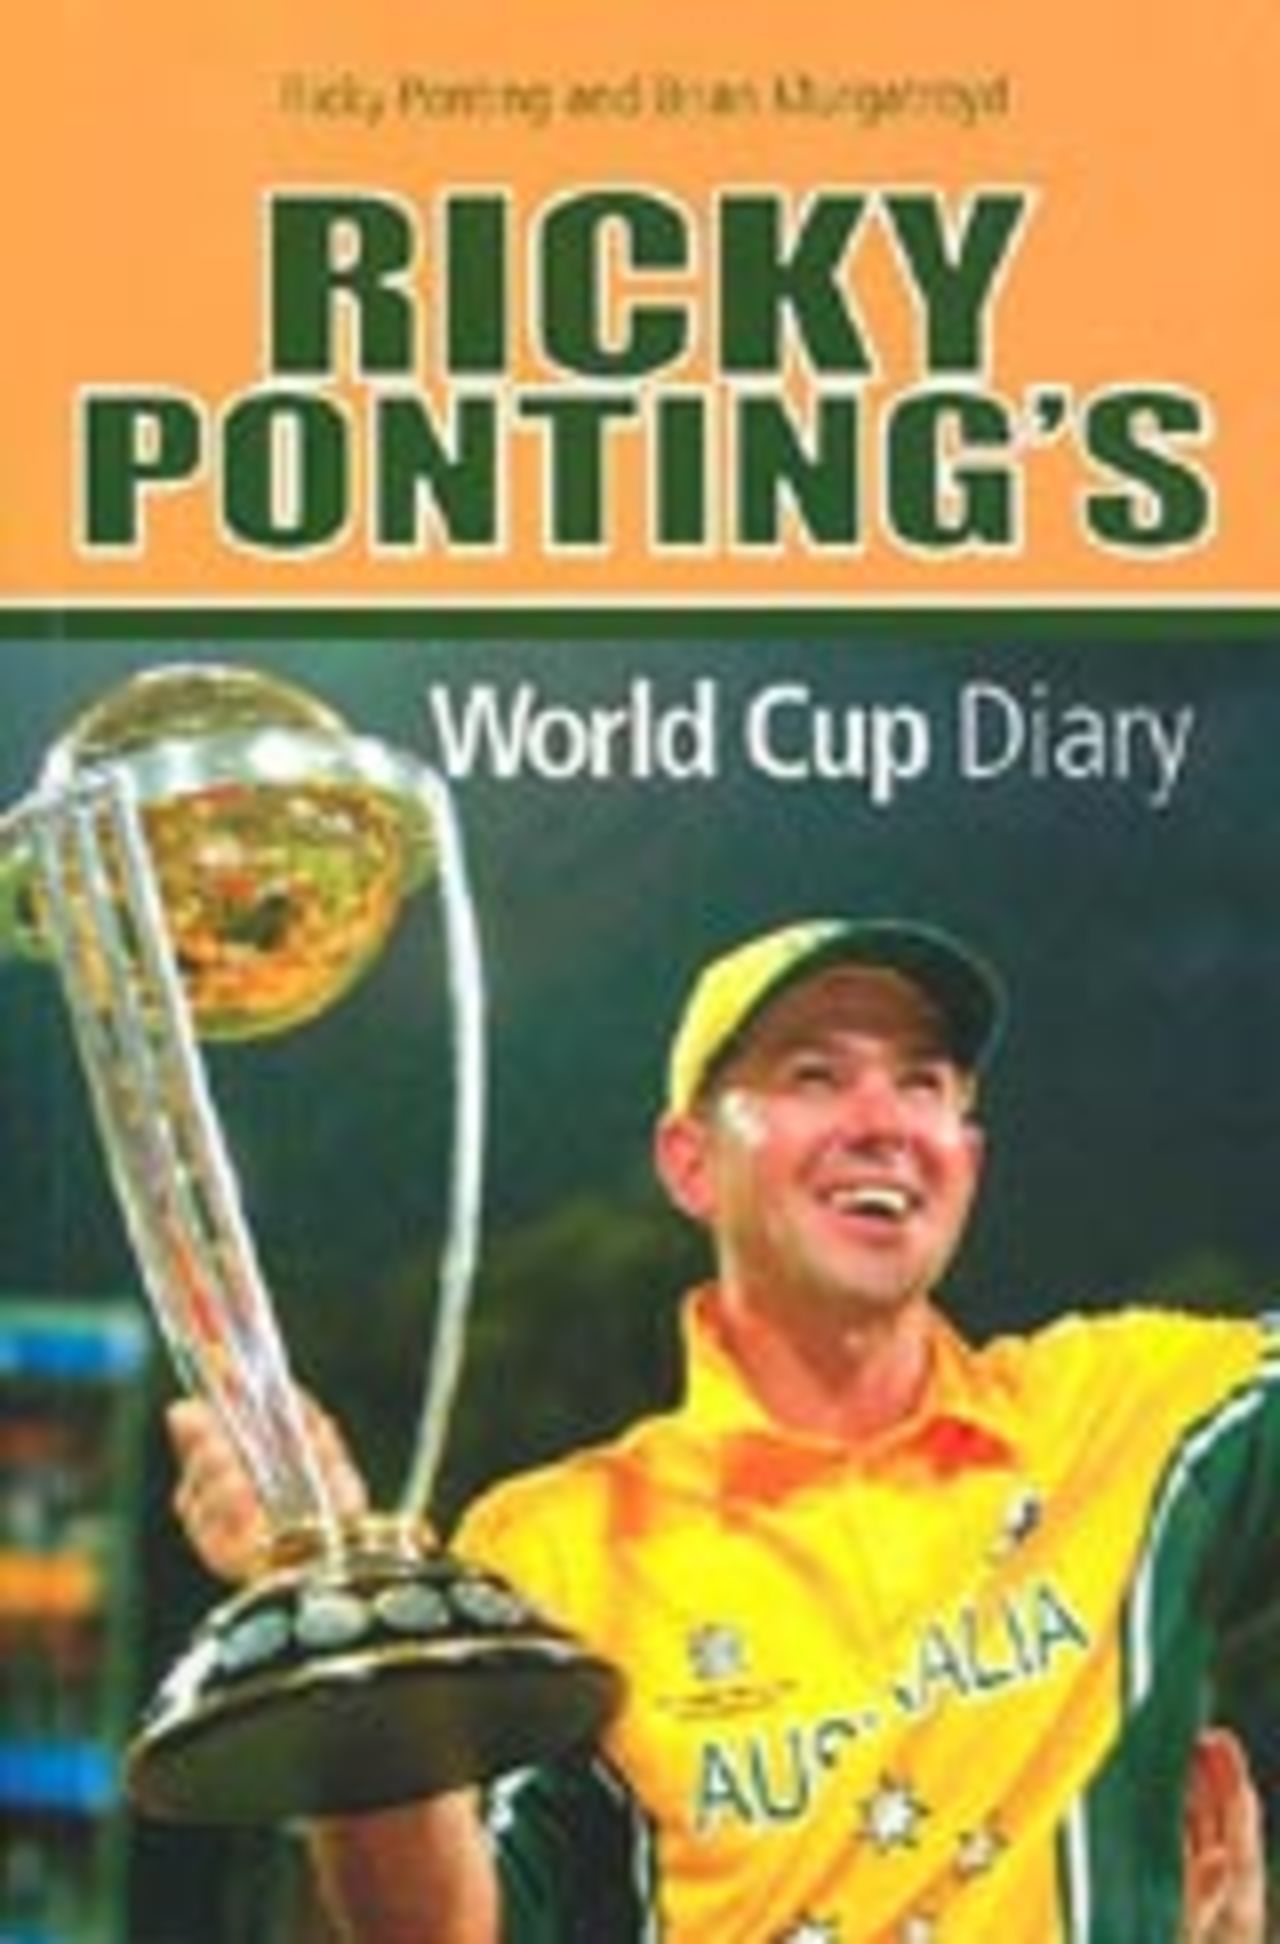 Ricky Ponting's World Cup diary cover